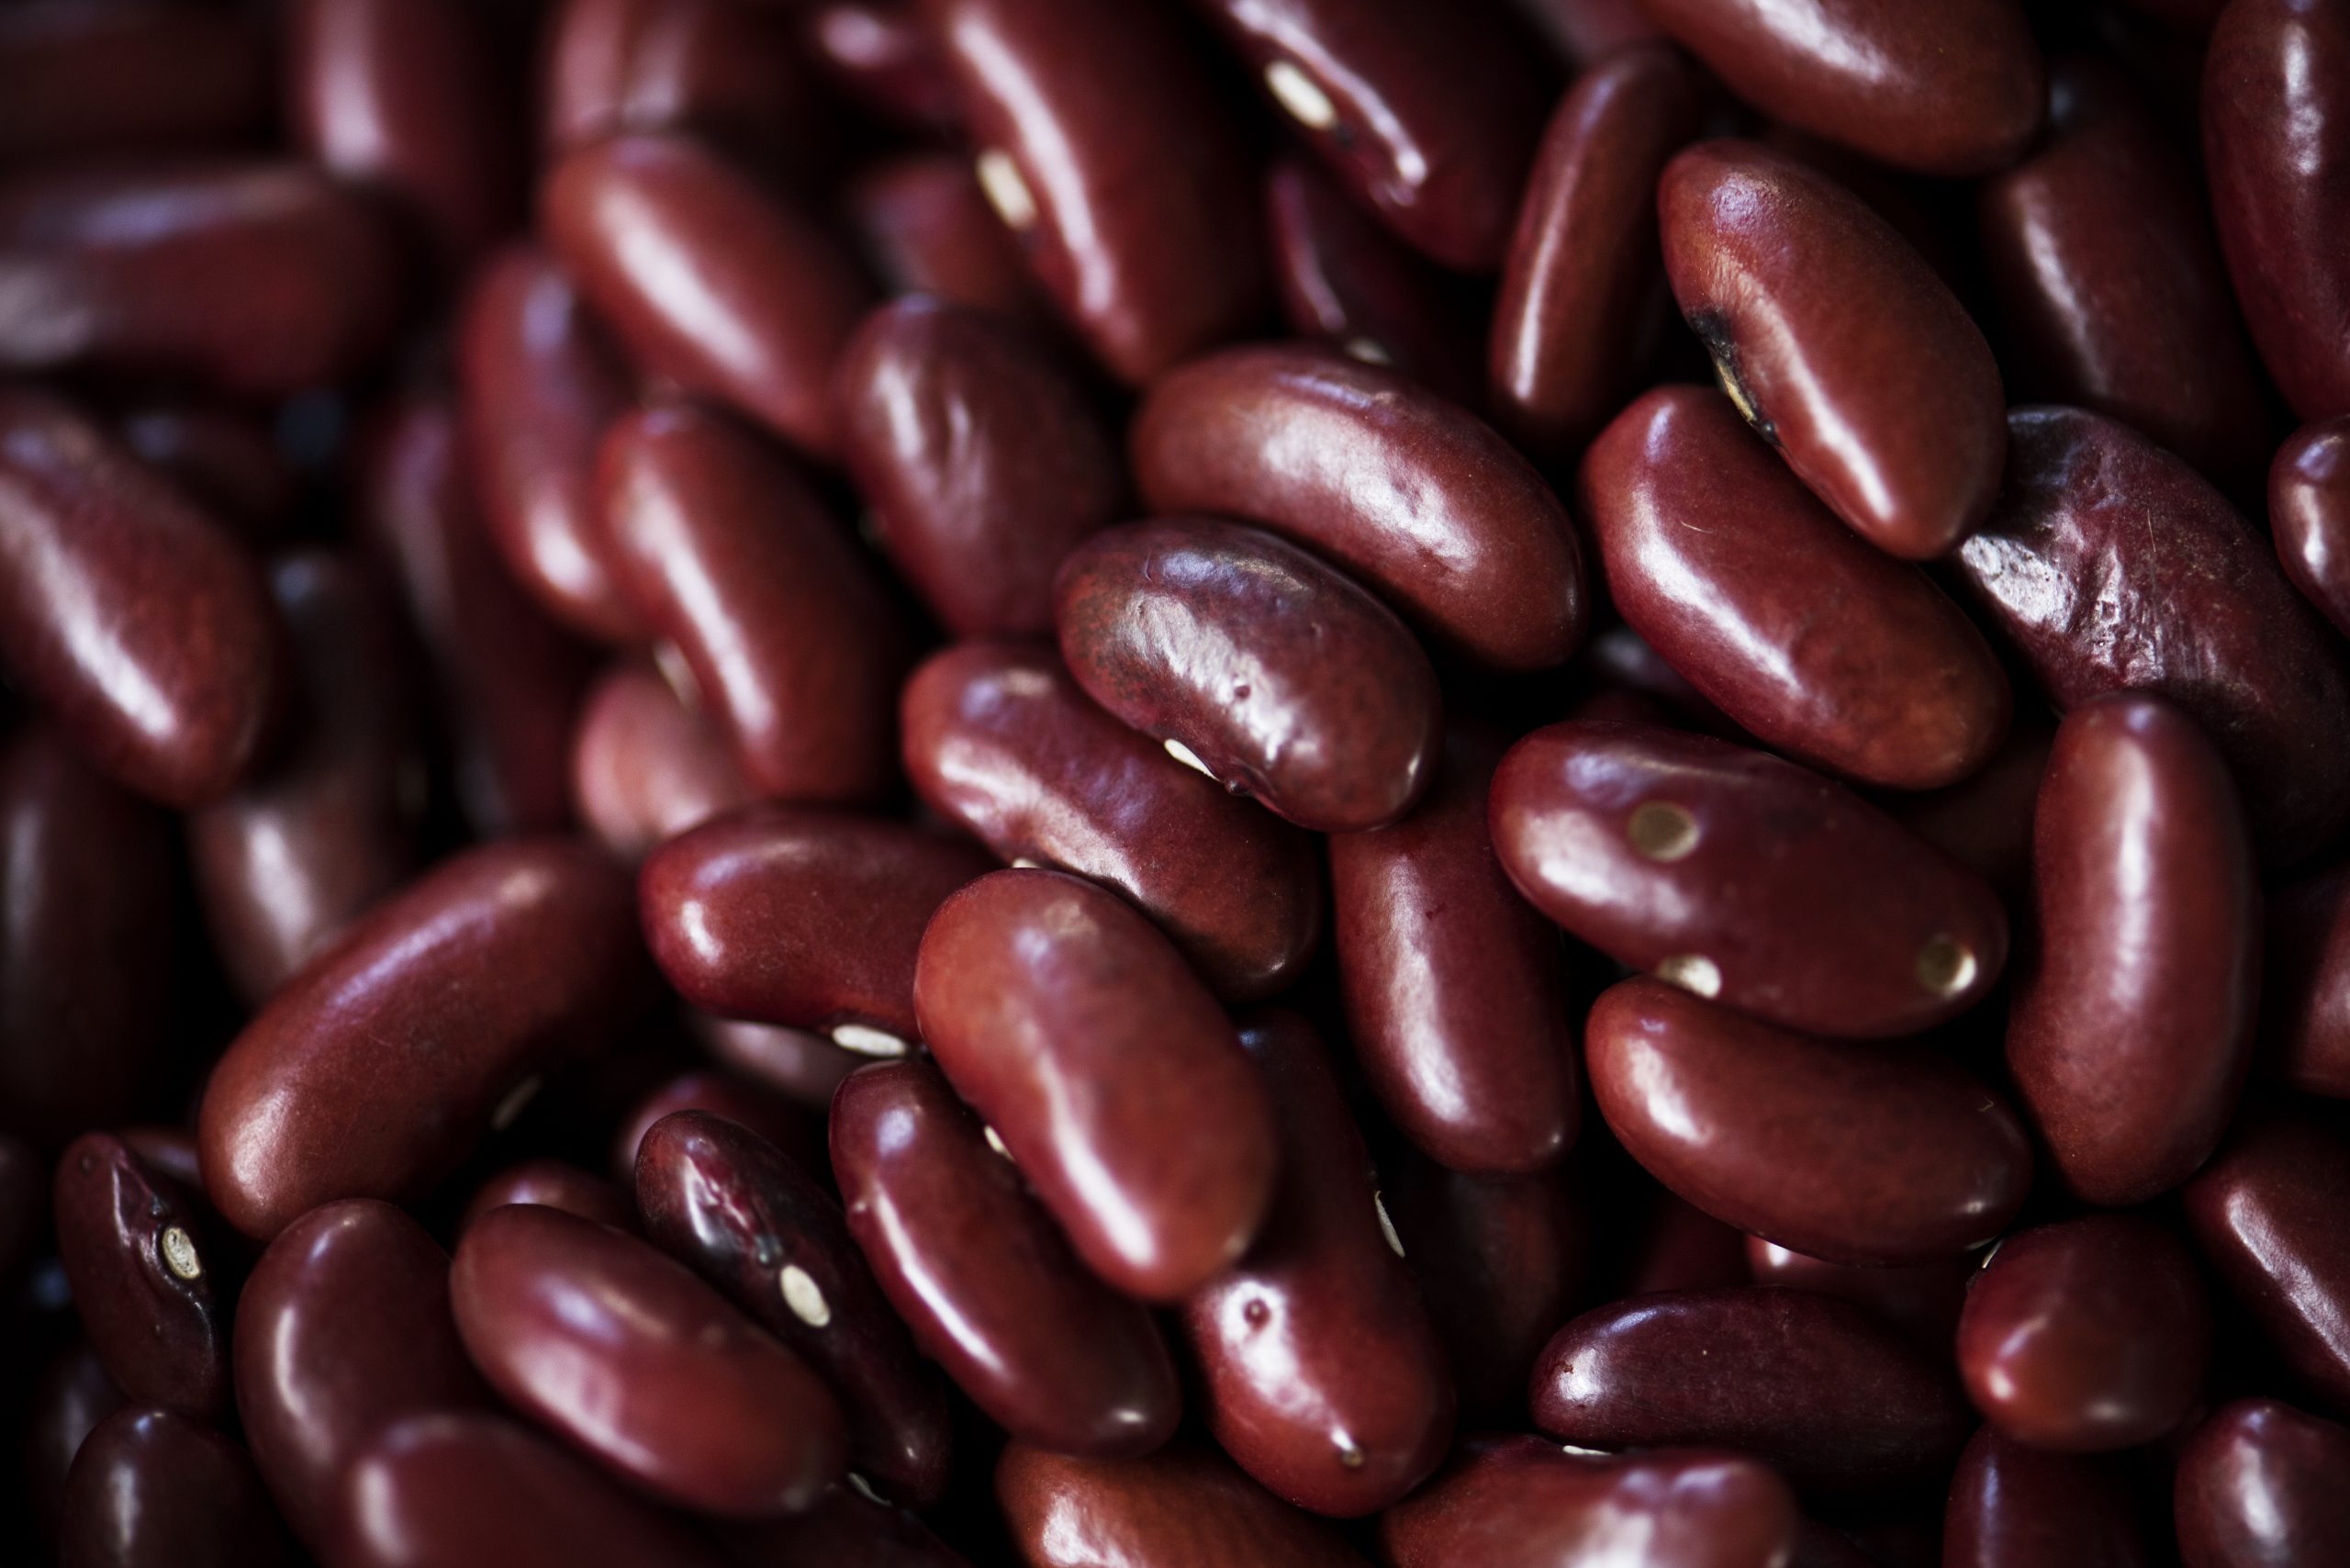  A closeup shot of red kidney bean seeds product